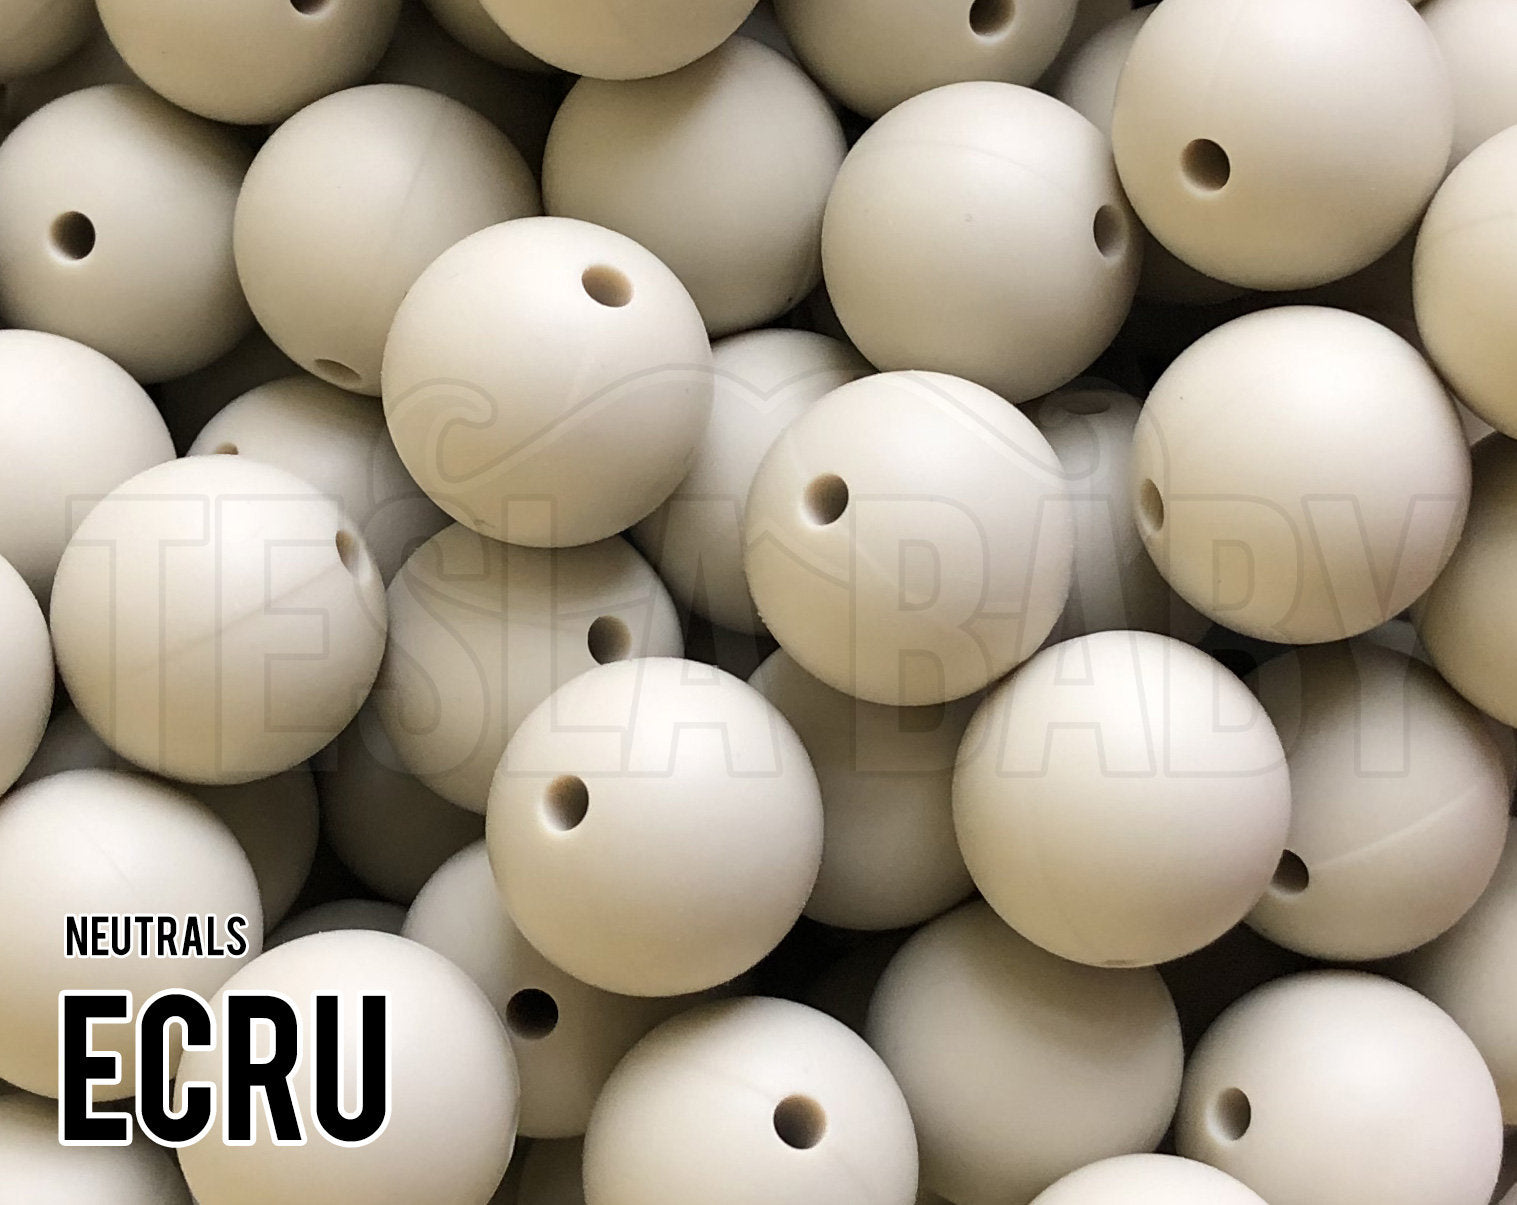 Silicone Beads, 15 mm Ecru Silicone Beads 5-1,000 (aka off white, tan, beige, light brown) Bulk Silicone Beads Wholesale